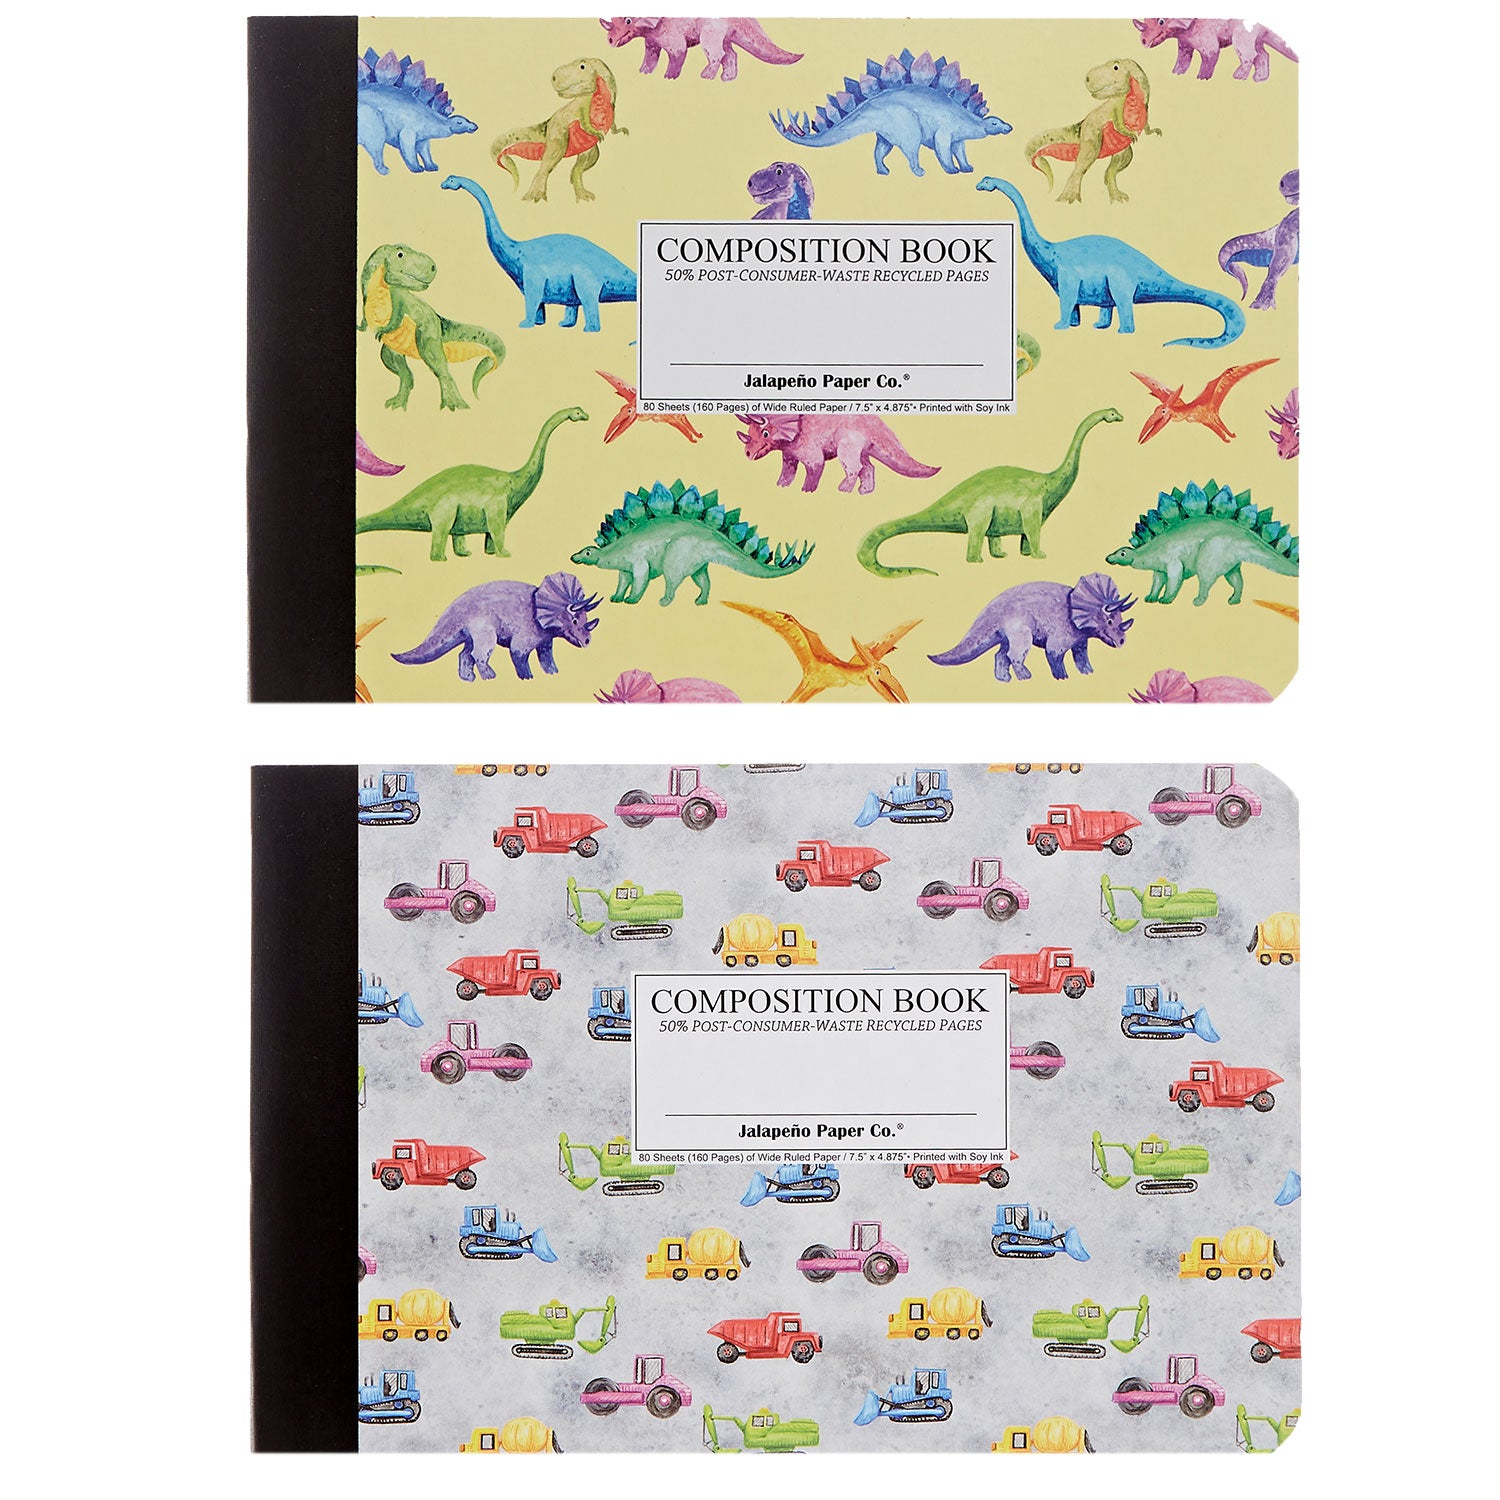 Half-size composition books featuring dinosaurs and construction vehicles